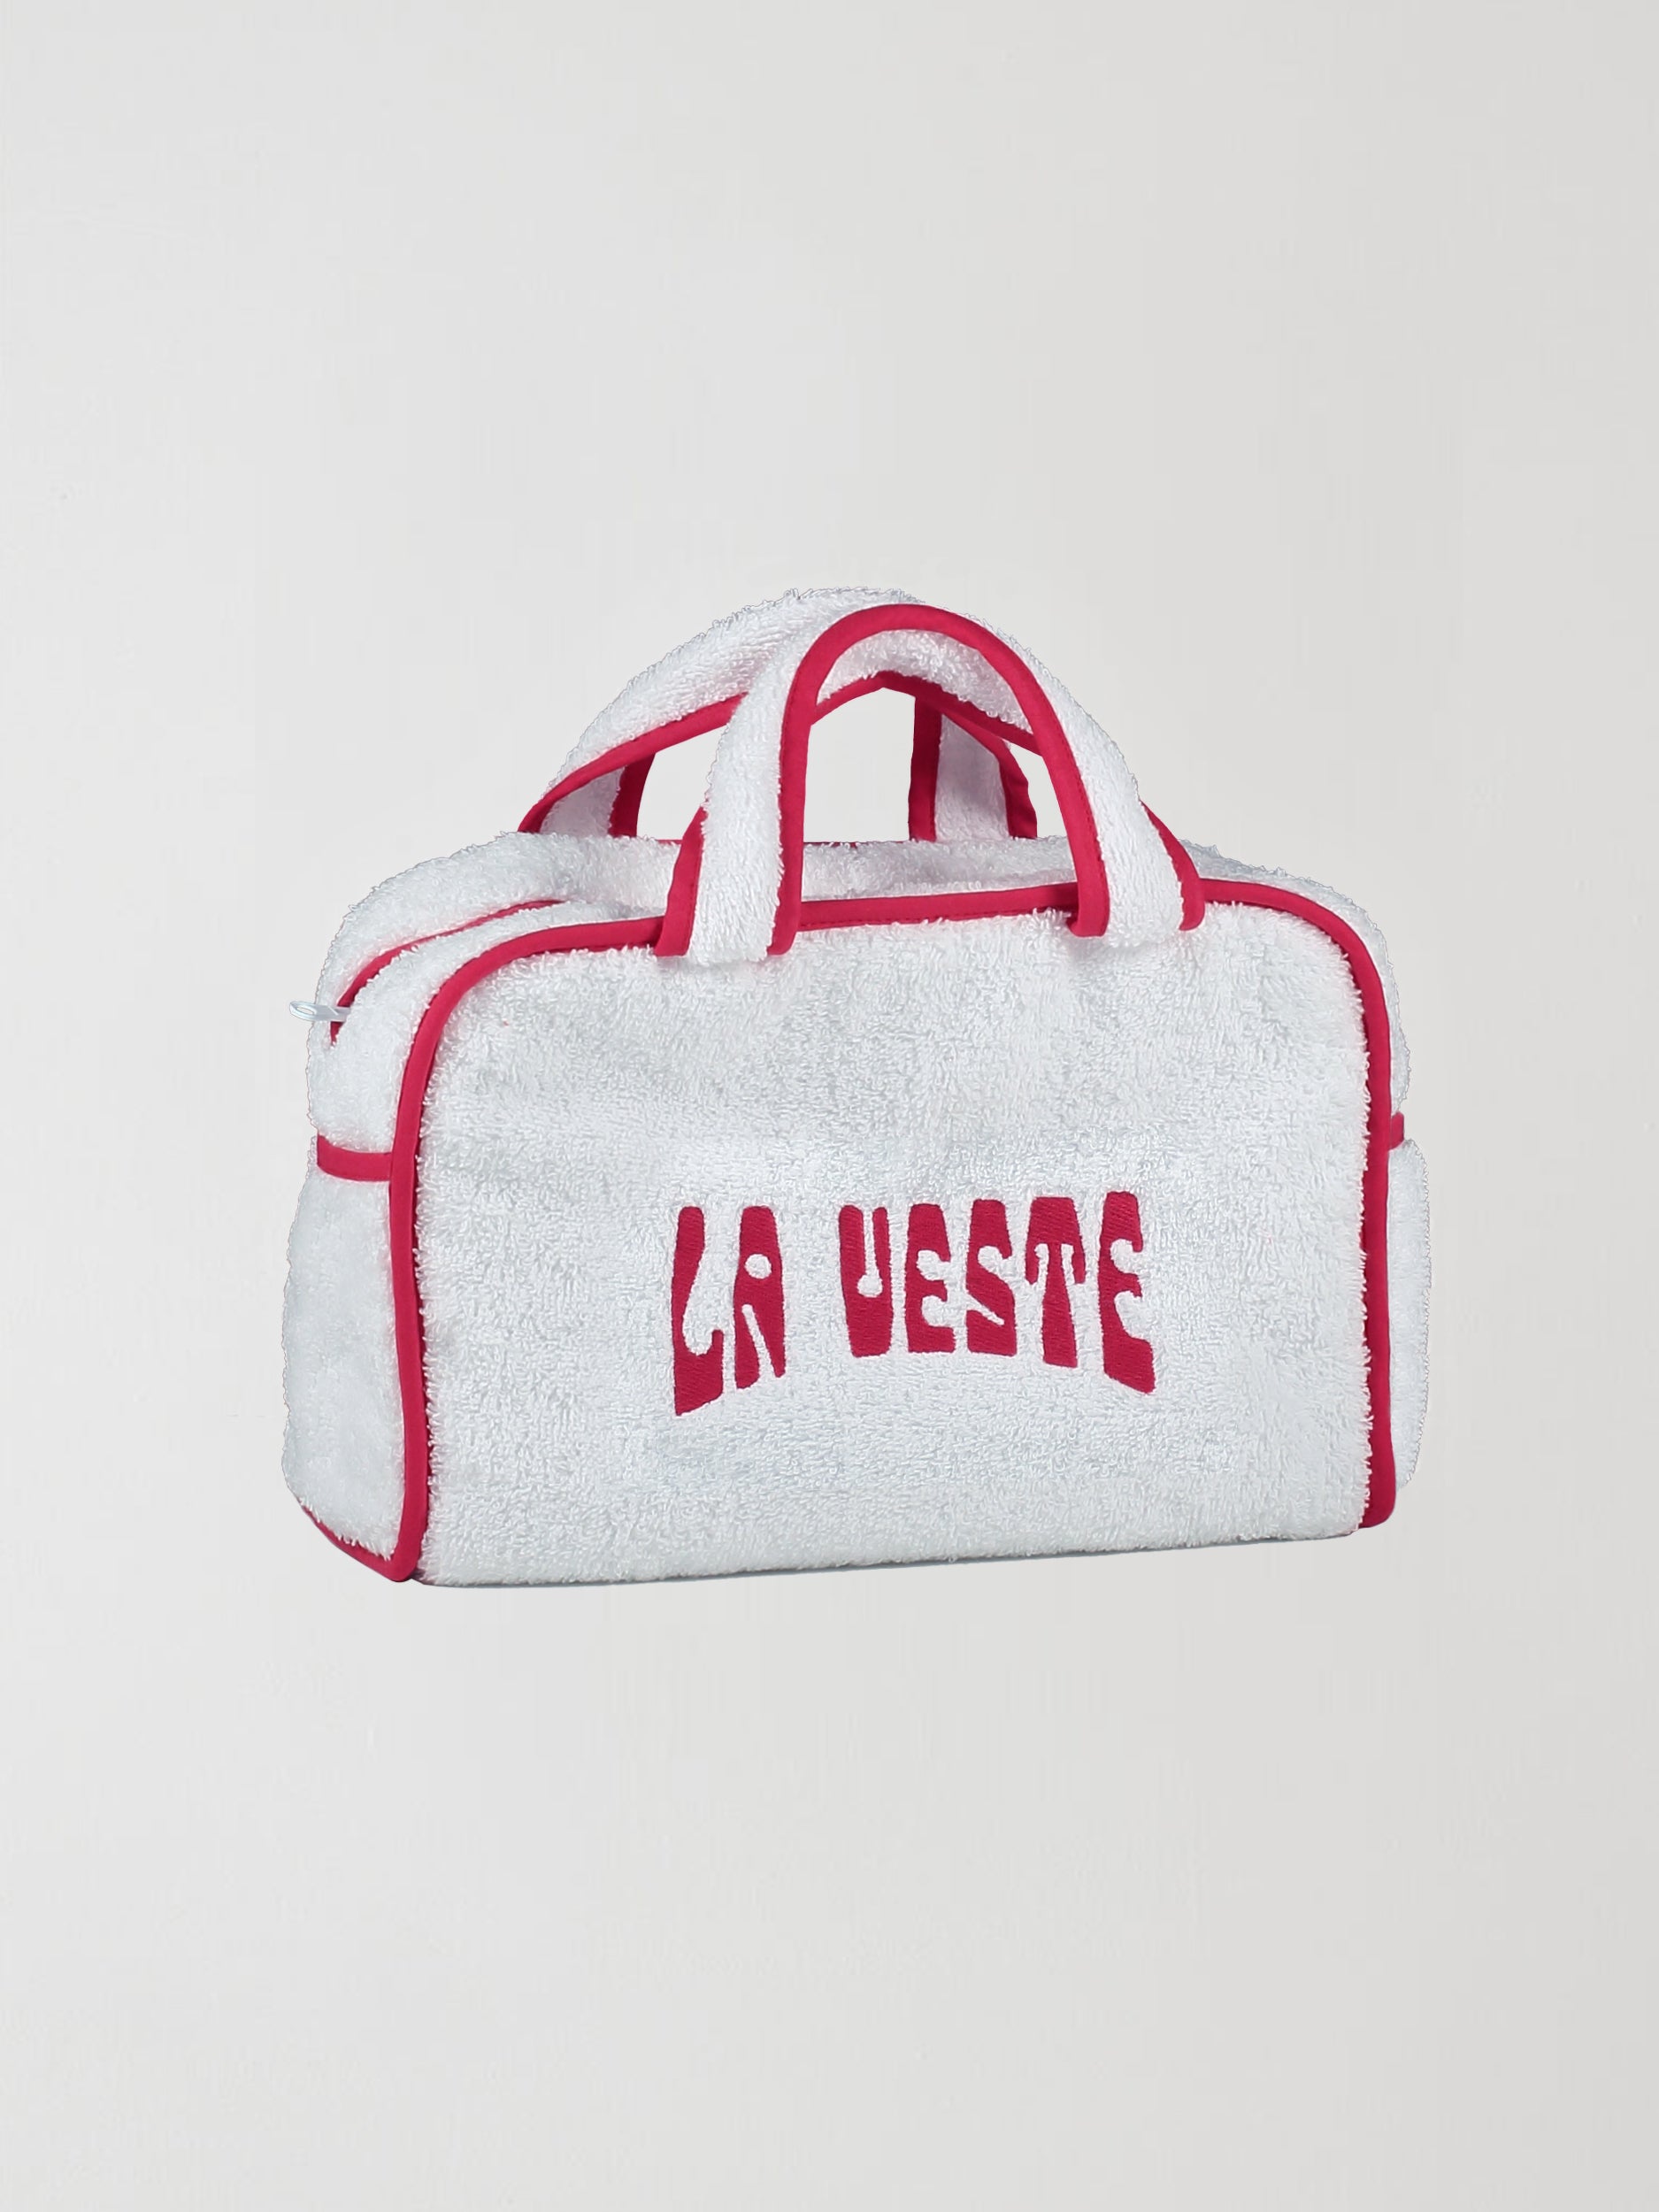 Mini Terry Towel Bag Red is a towel bag with La Veste details and logo on face ideal for any occasion.